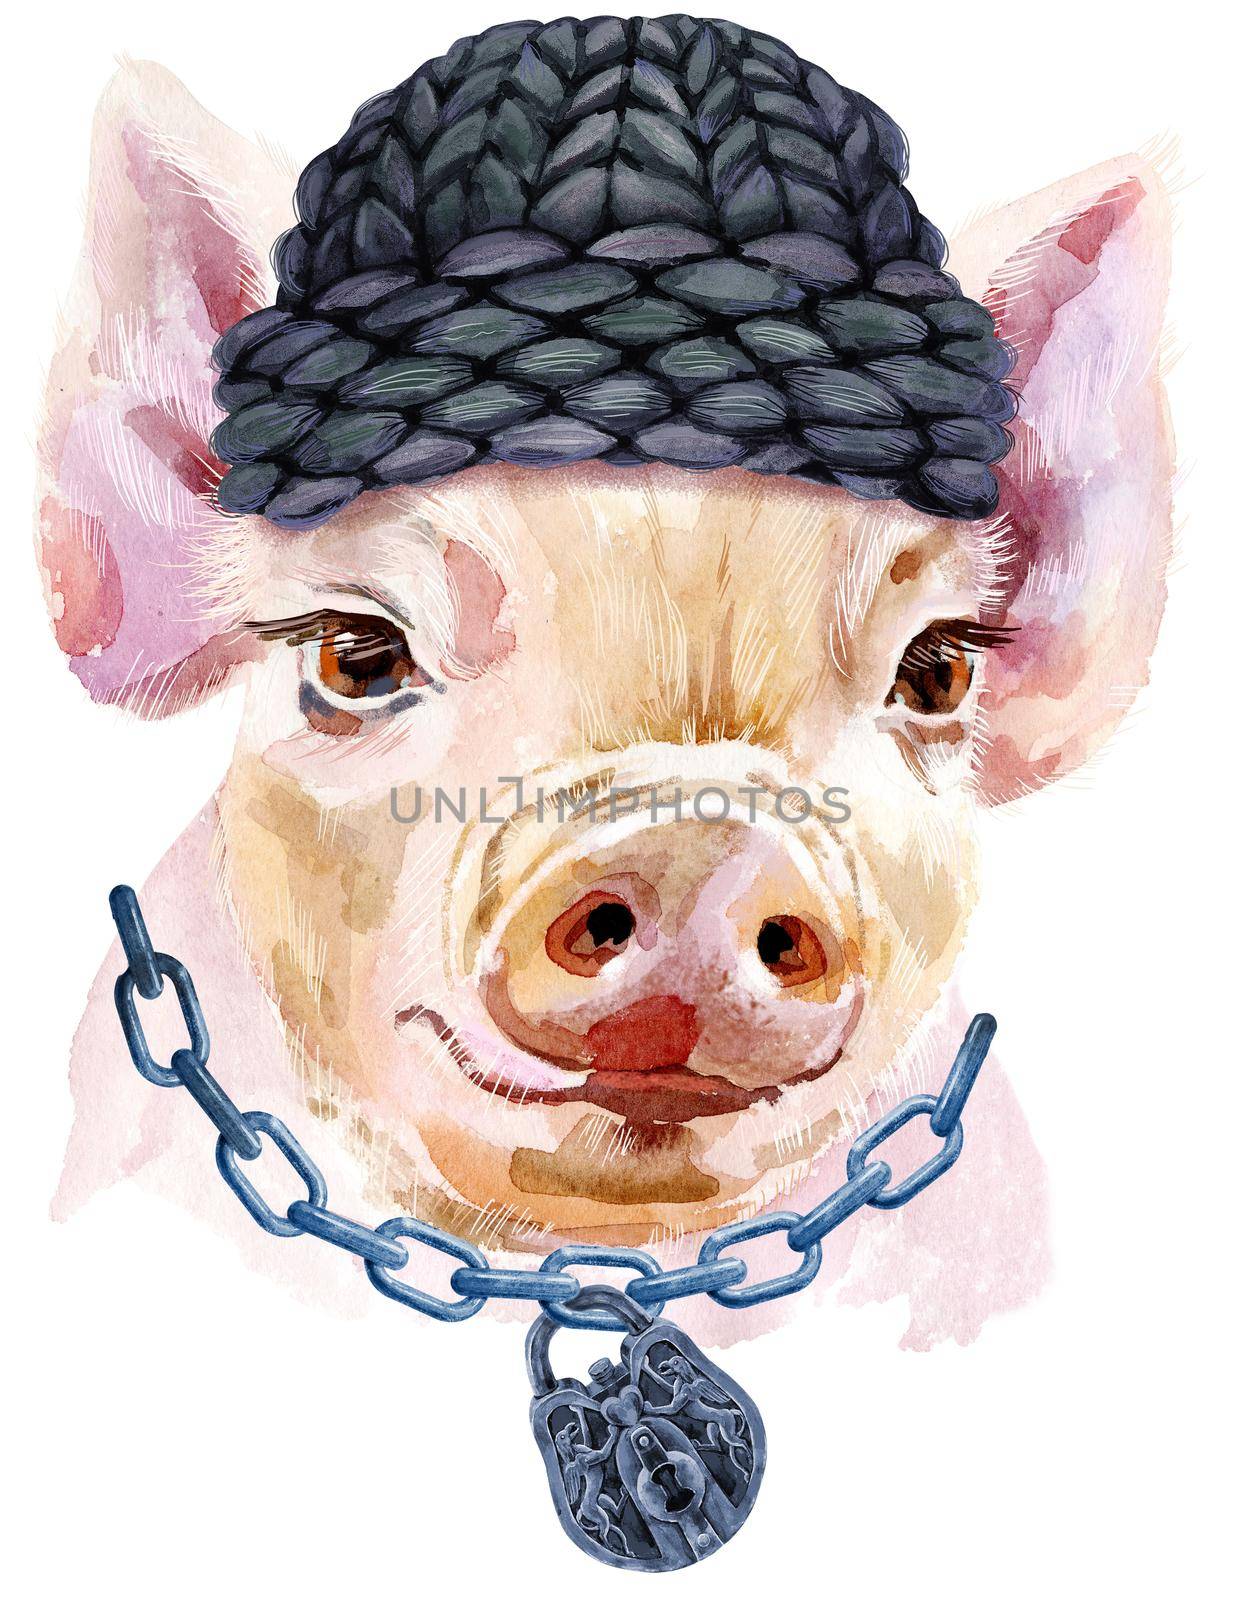 Watercolor portrait of mini pig in black winter hat, with chain and lock by NataOmsk